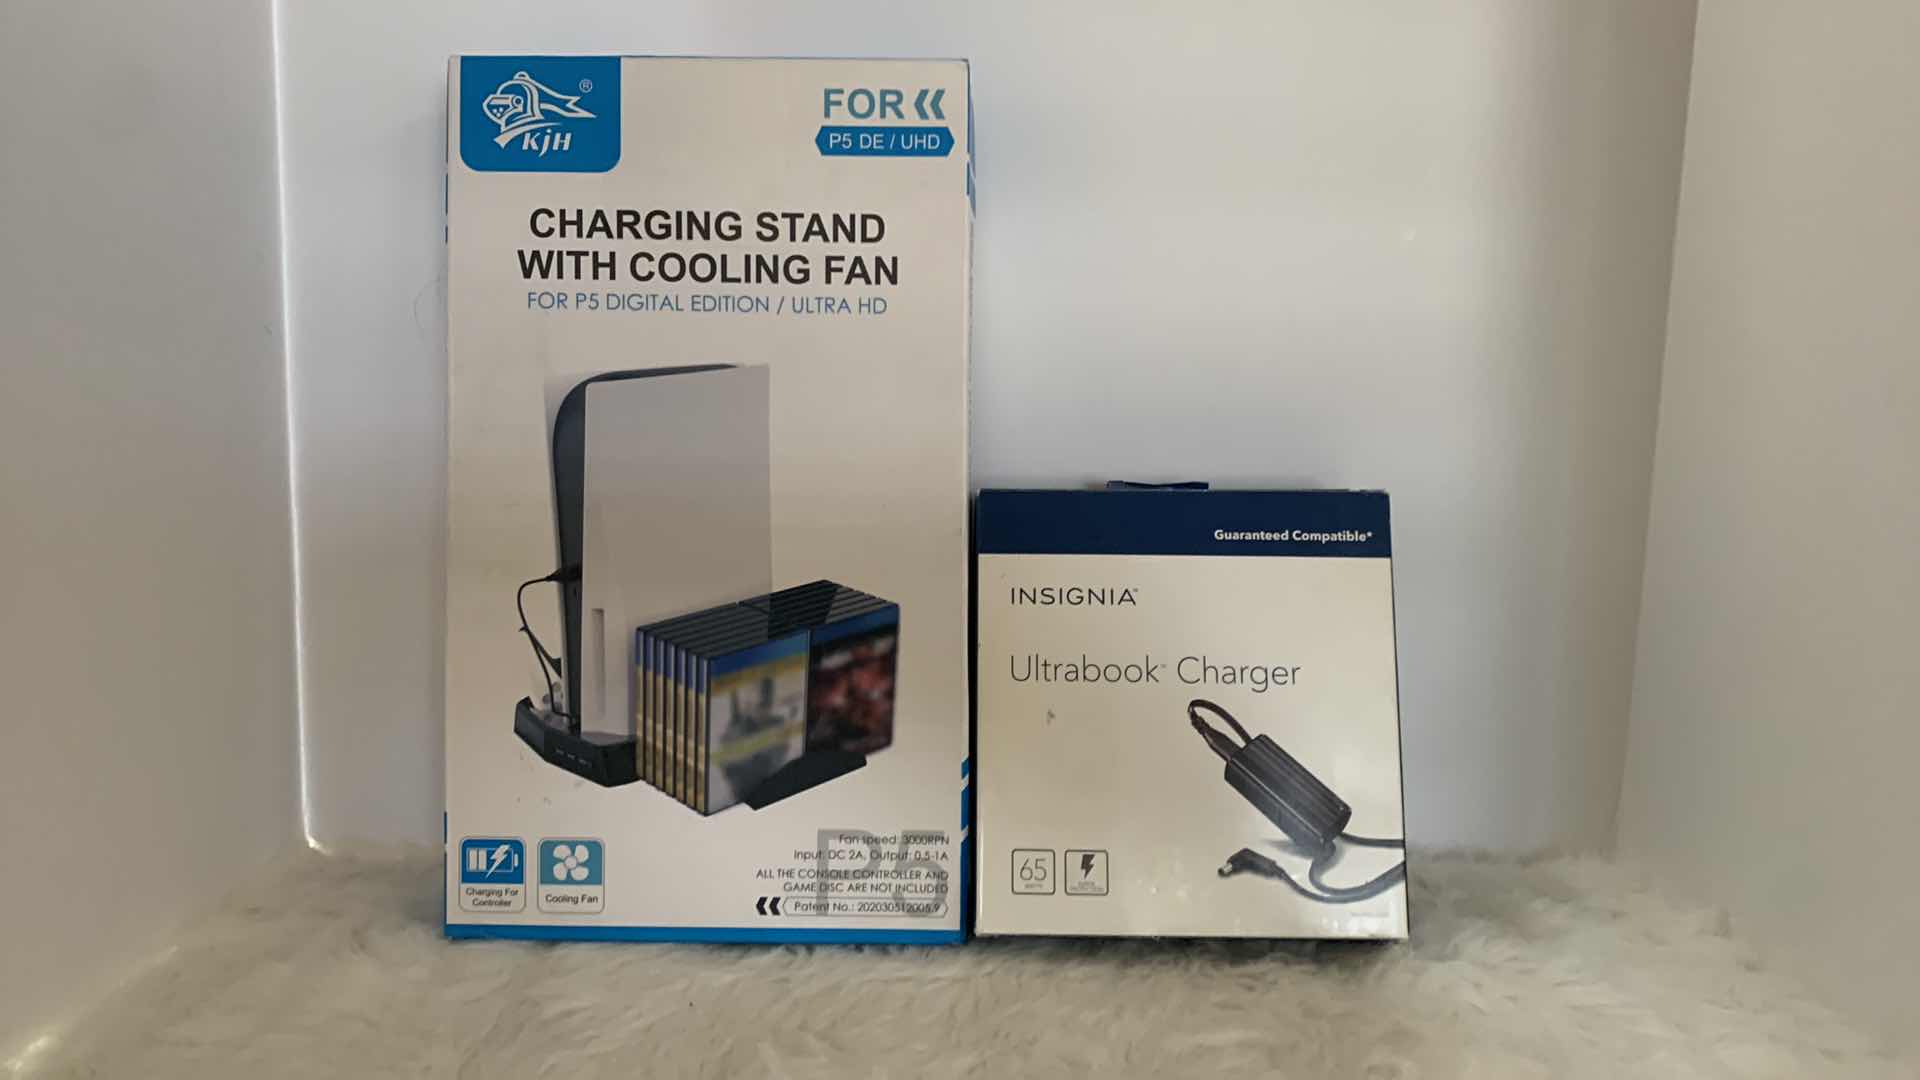 Photo 1 of 2 - NEW ELECTRONICS, CHARGING STAND AND ULTRABOOK CHARGER